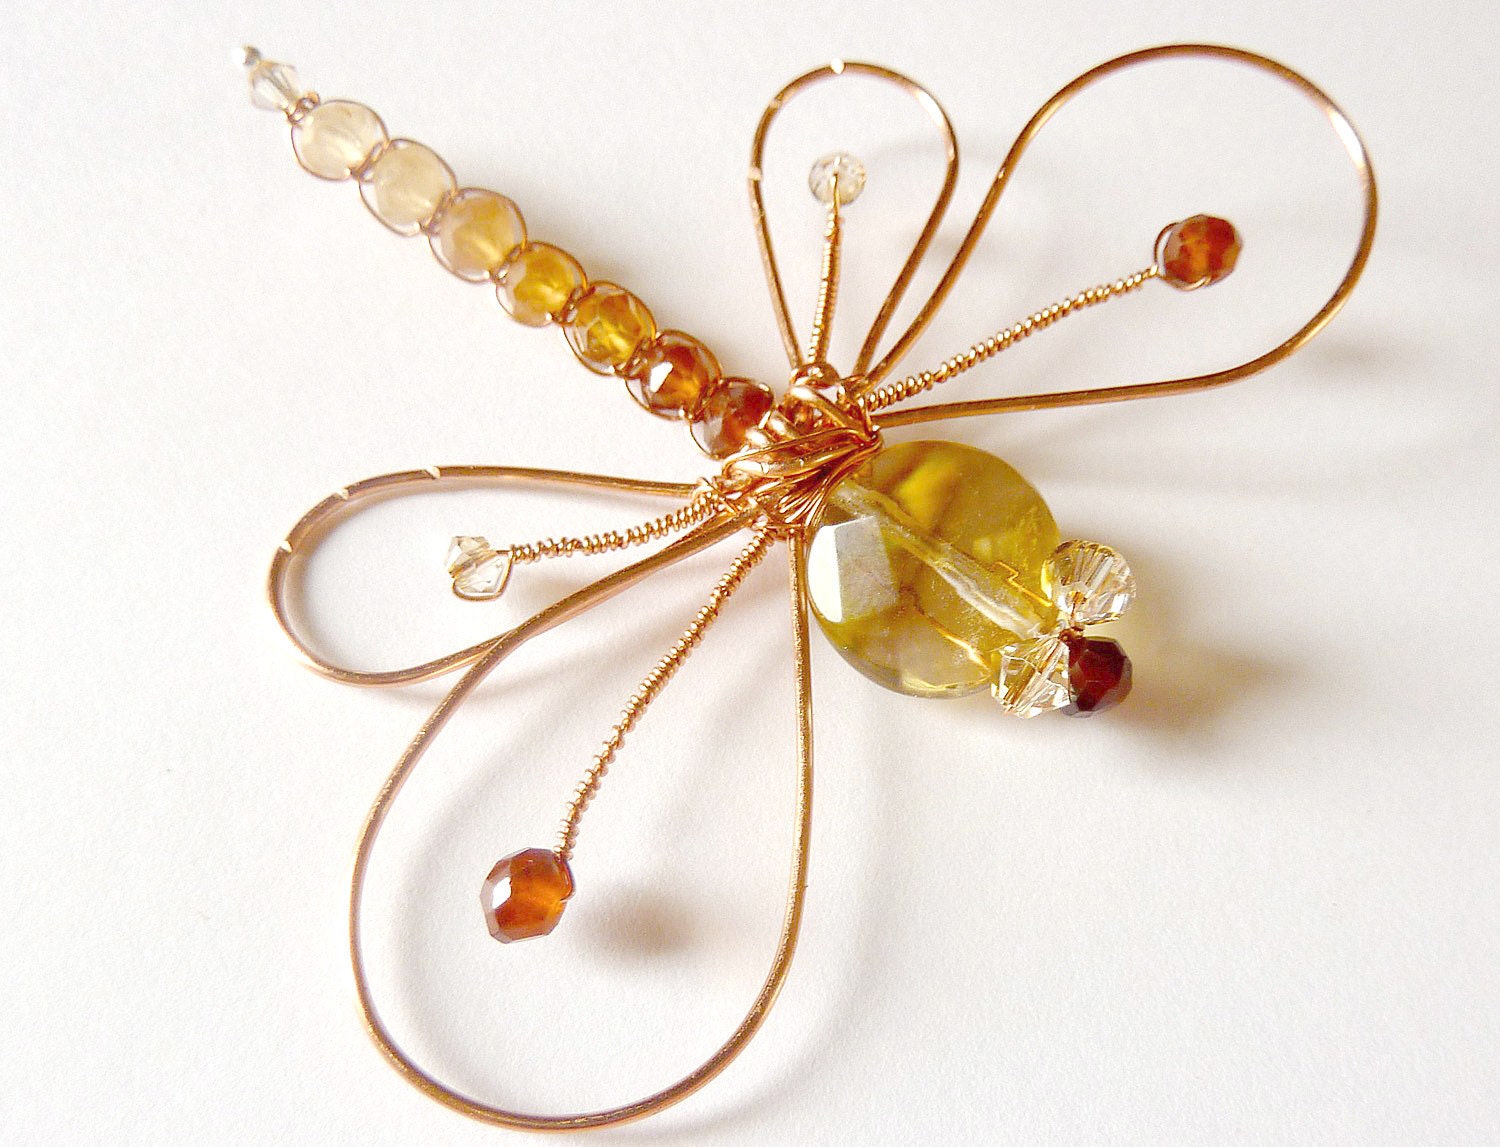 Volcano Quartz and Hessonite Garnet  large Copper Ornate Dragonfly Hair Pin, Brooch or Bouquet Decoration